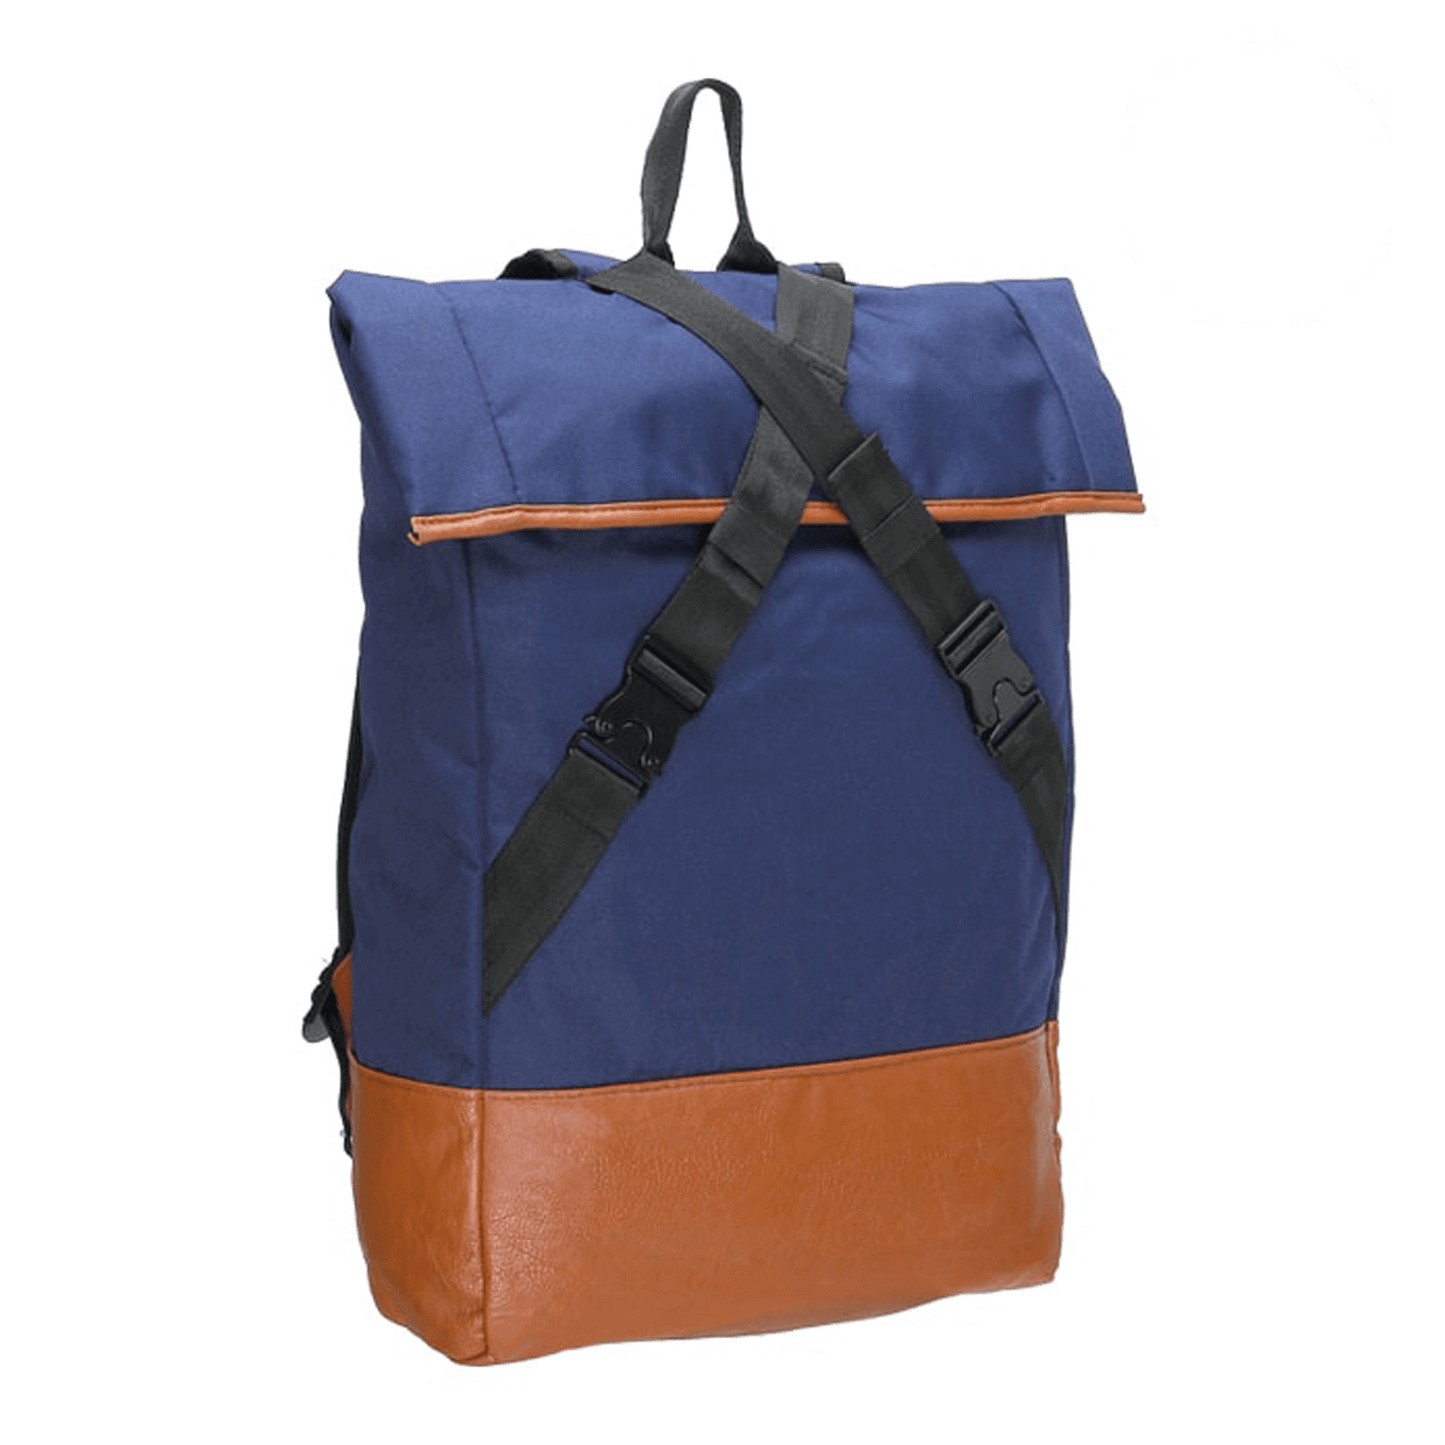 AWOL DAILY Large Blue Backpack 886173 Harvest & Extraction 853336007973